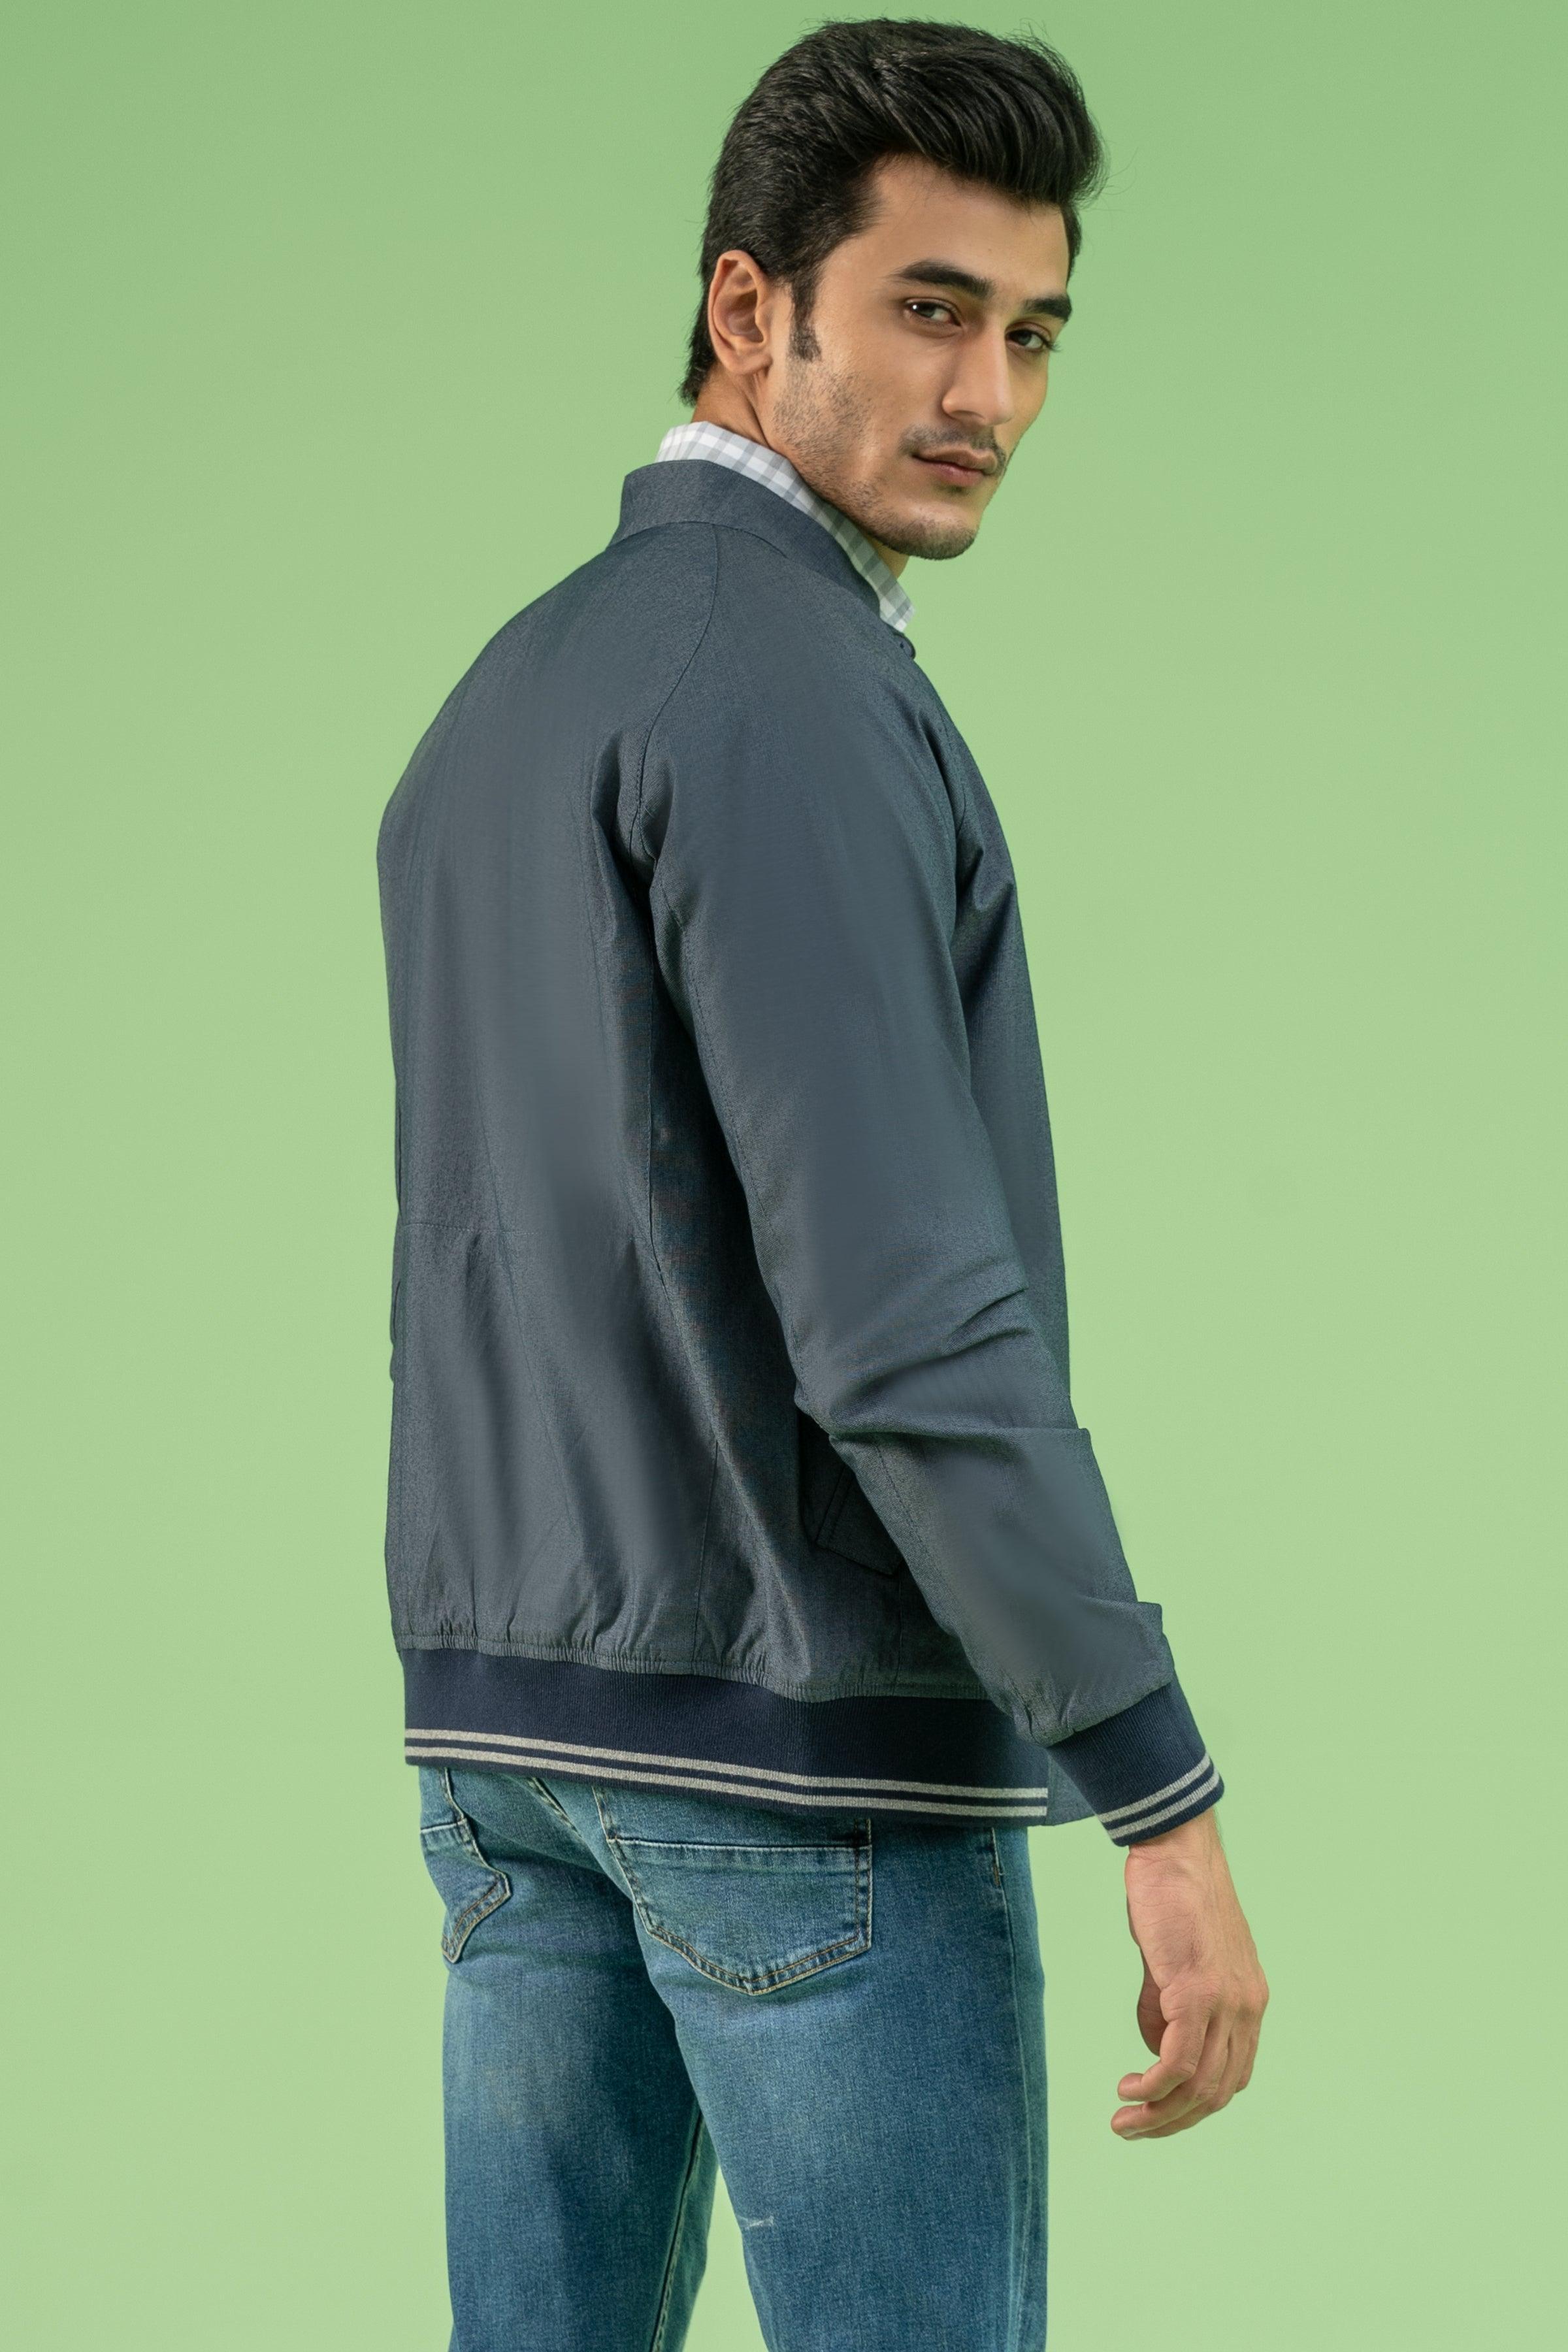 FULL SLEEVE TIPPING TEXTURED JACKET NAVY – Charcoal Clothing